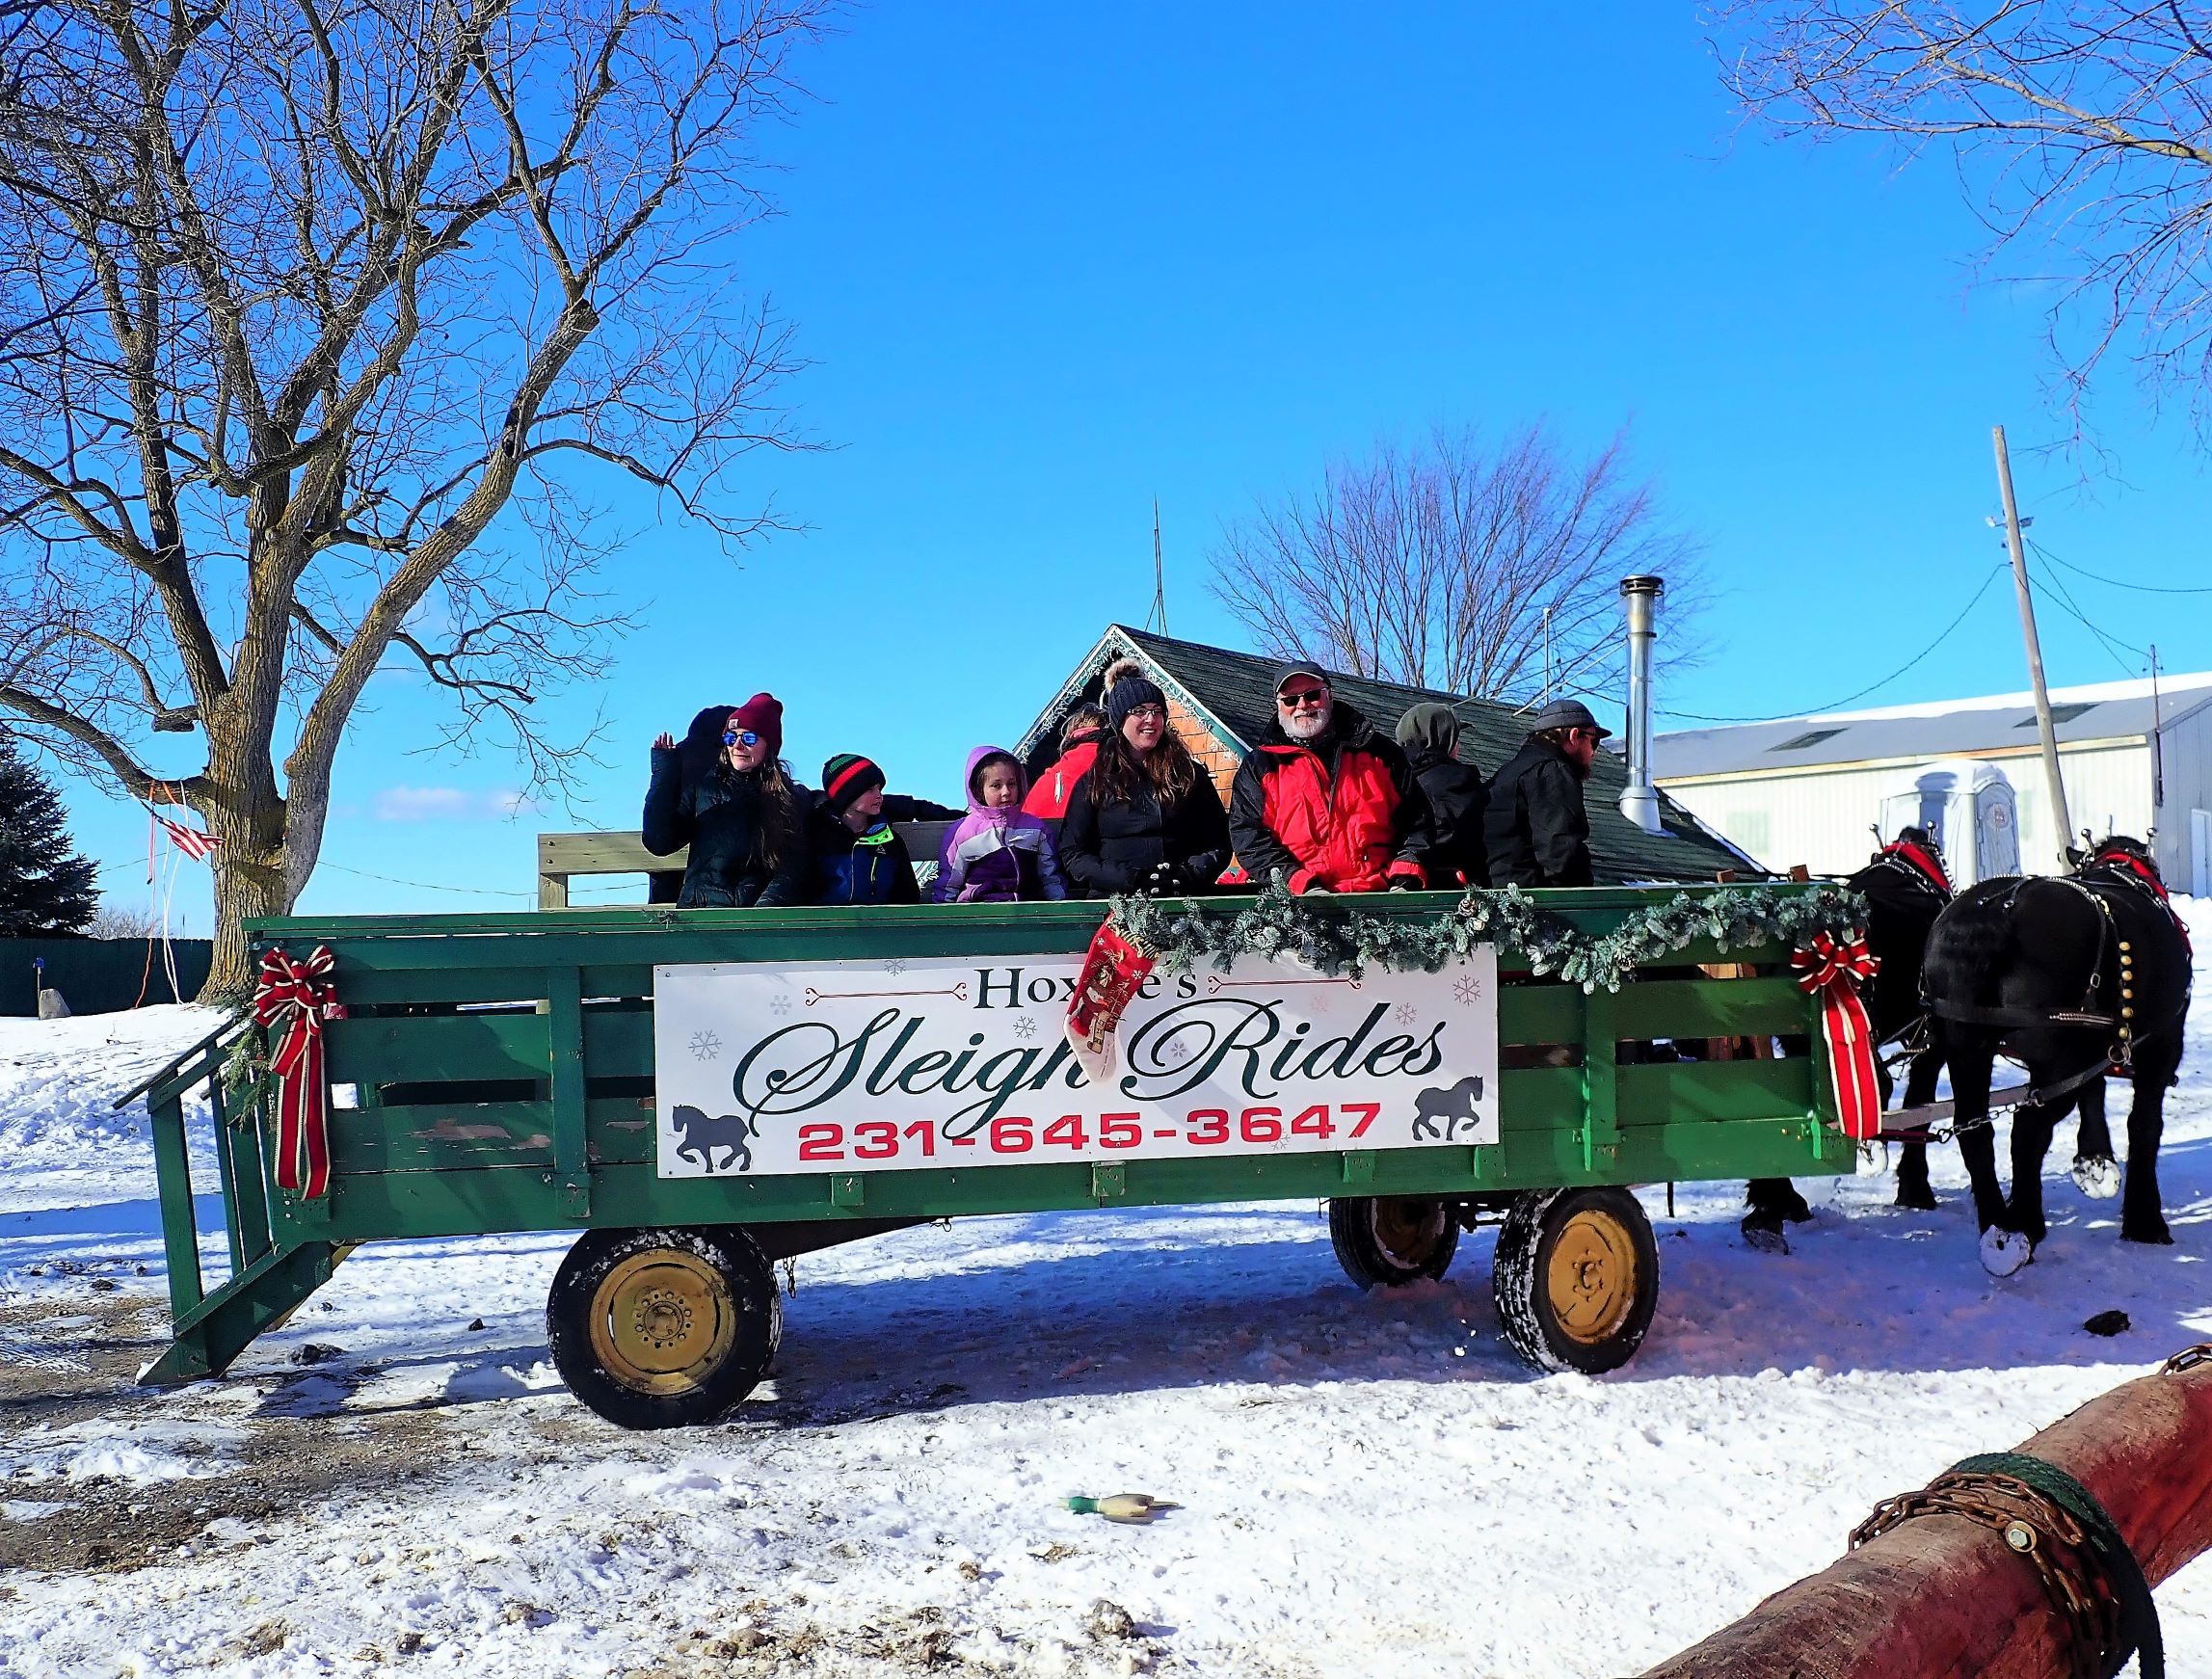 Things to do near Traverse City in winter: go on a horse drawn sleigh ride at Antler Ridge Farms!